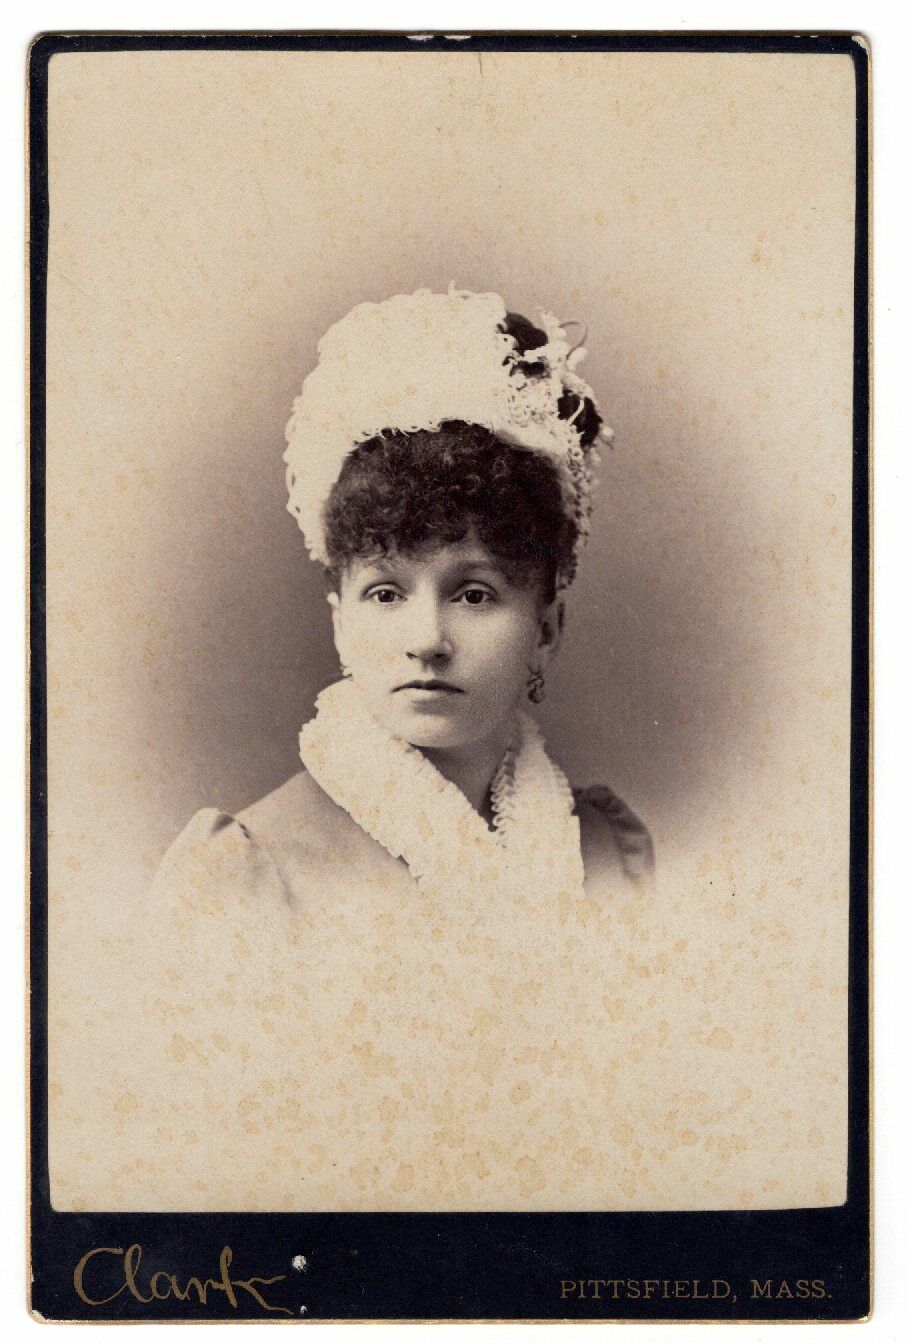 ATTRACTIVE WOMAN WITH A TALL FANCY HAT AND SCARF : PITTSFIELD, MASSACHUSETTS